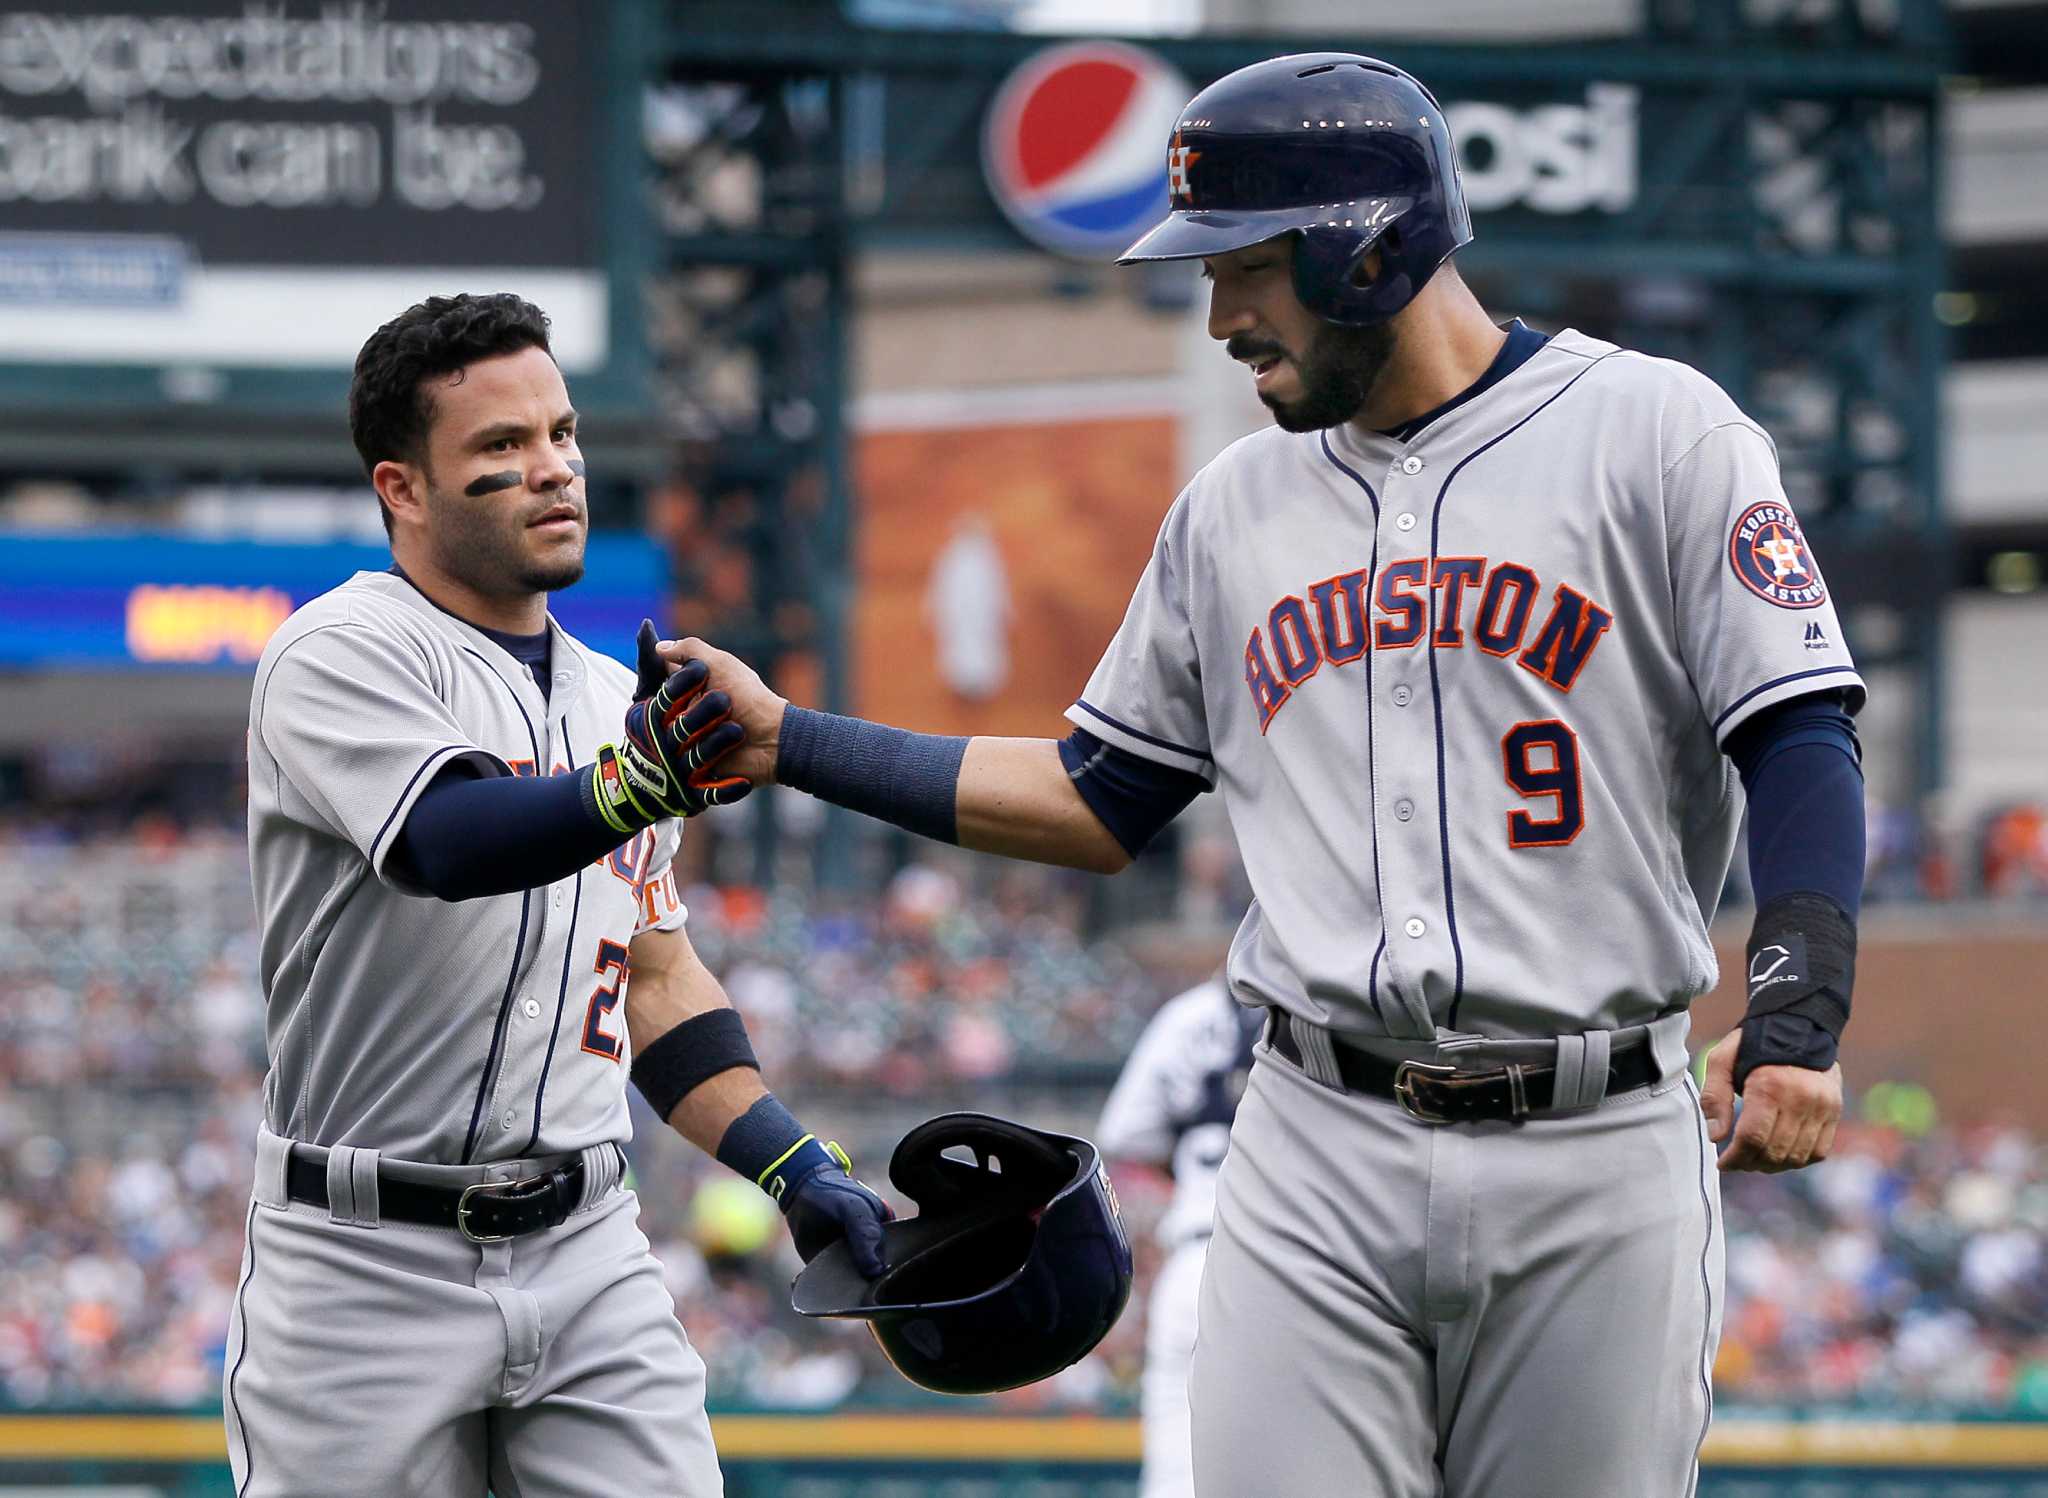 Astros' Marwin Gonzalez to visit specialist for sore right hand